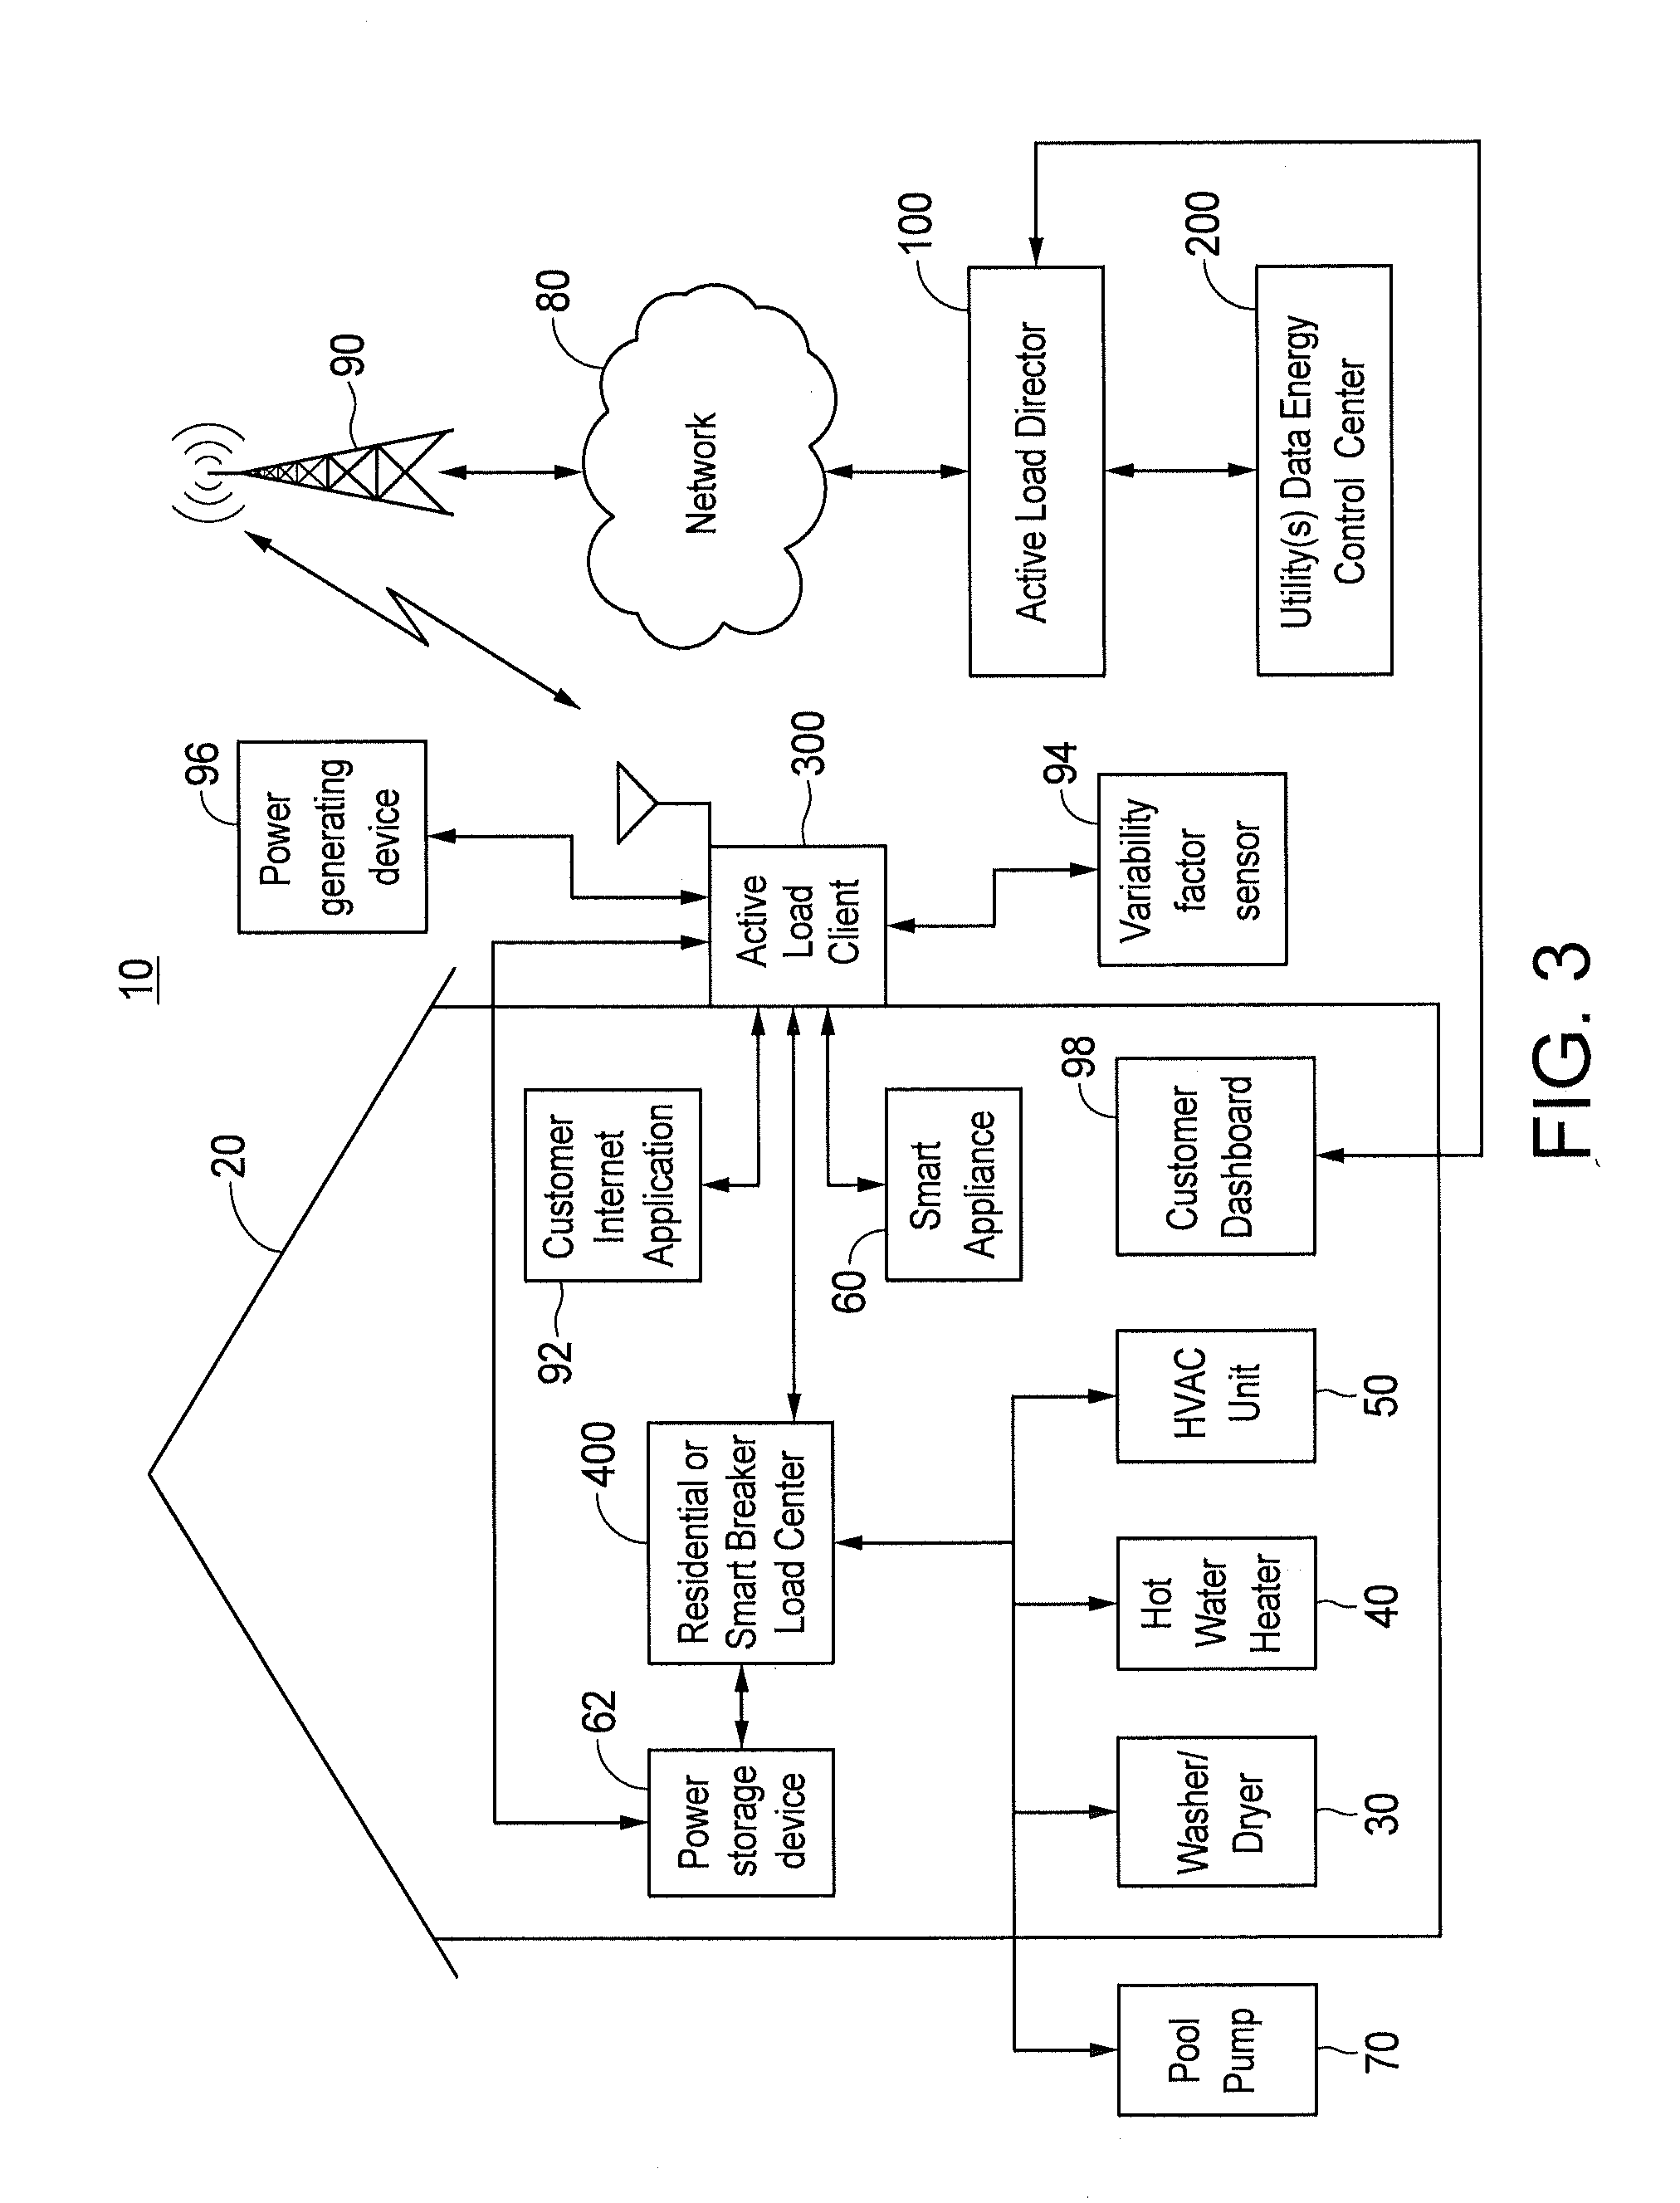 Method and apparatus for effecting controlled restart of electrical servcie with a utility service area